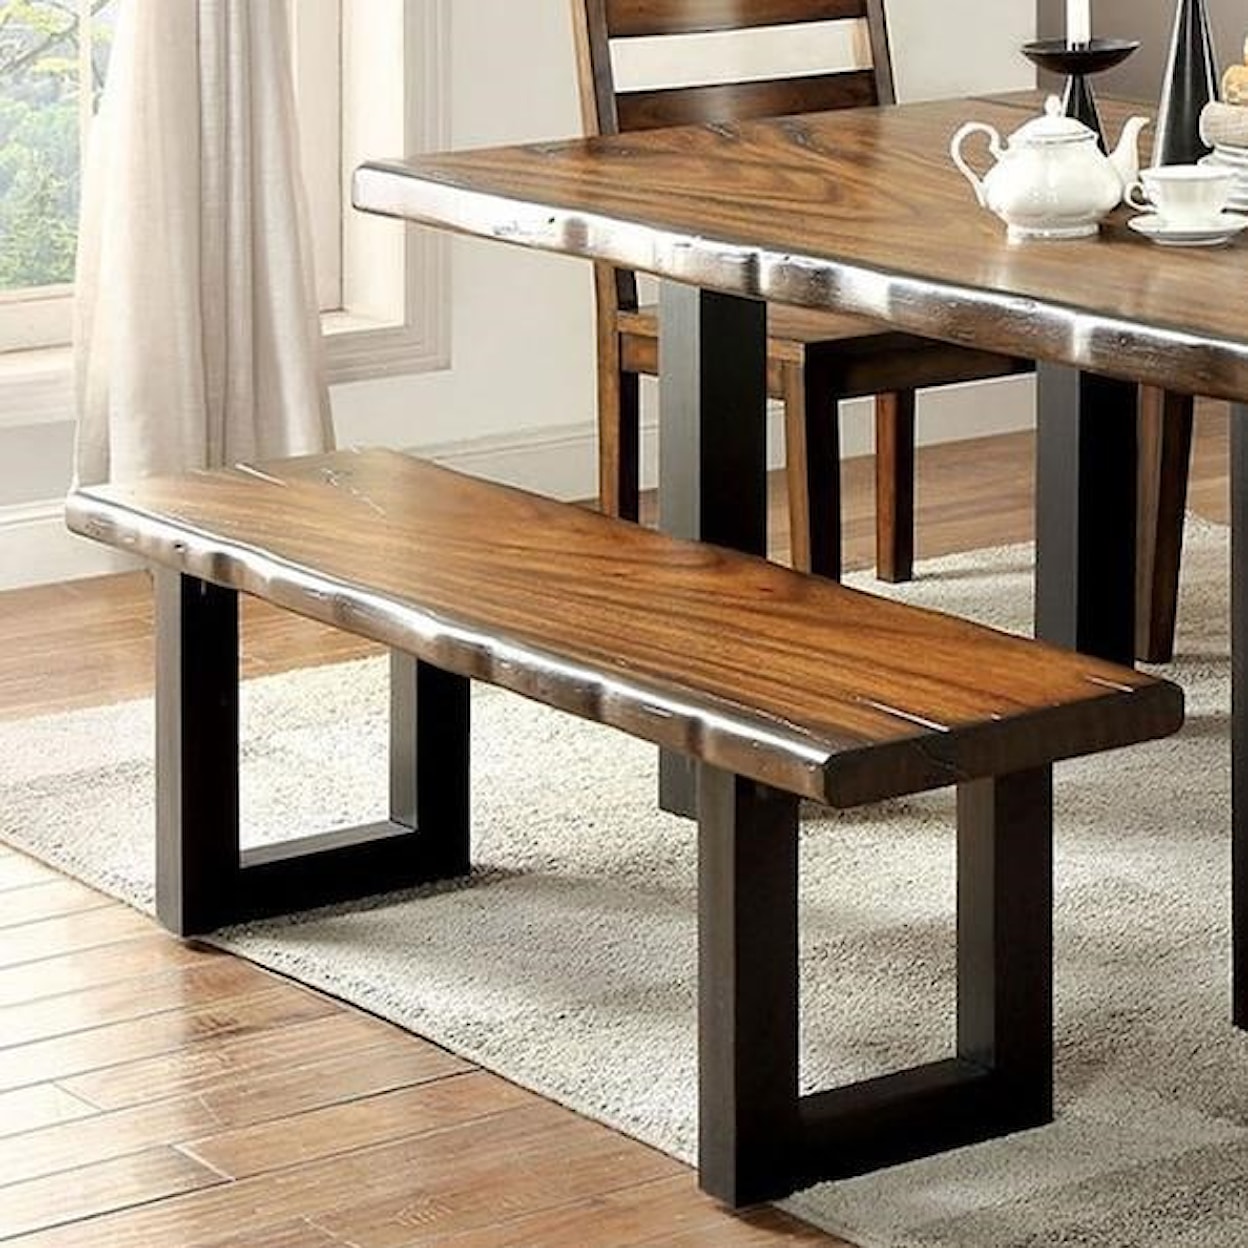 Furniture of America Maddison Dining Set with Bench